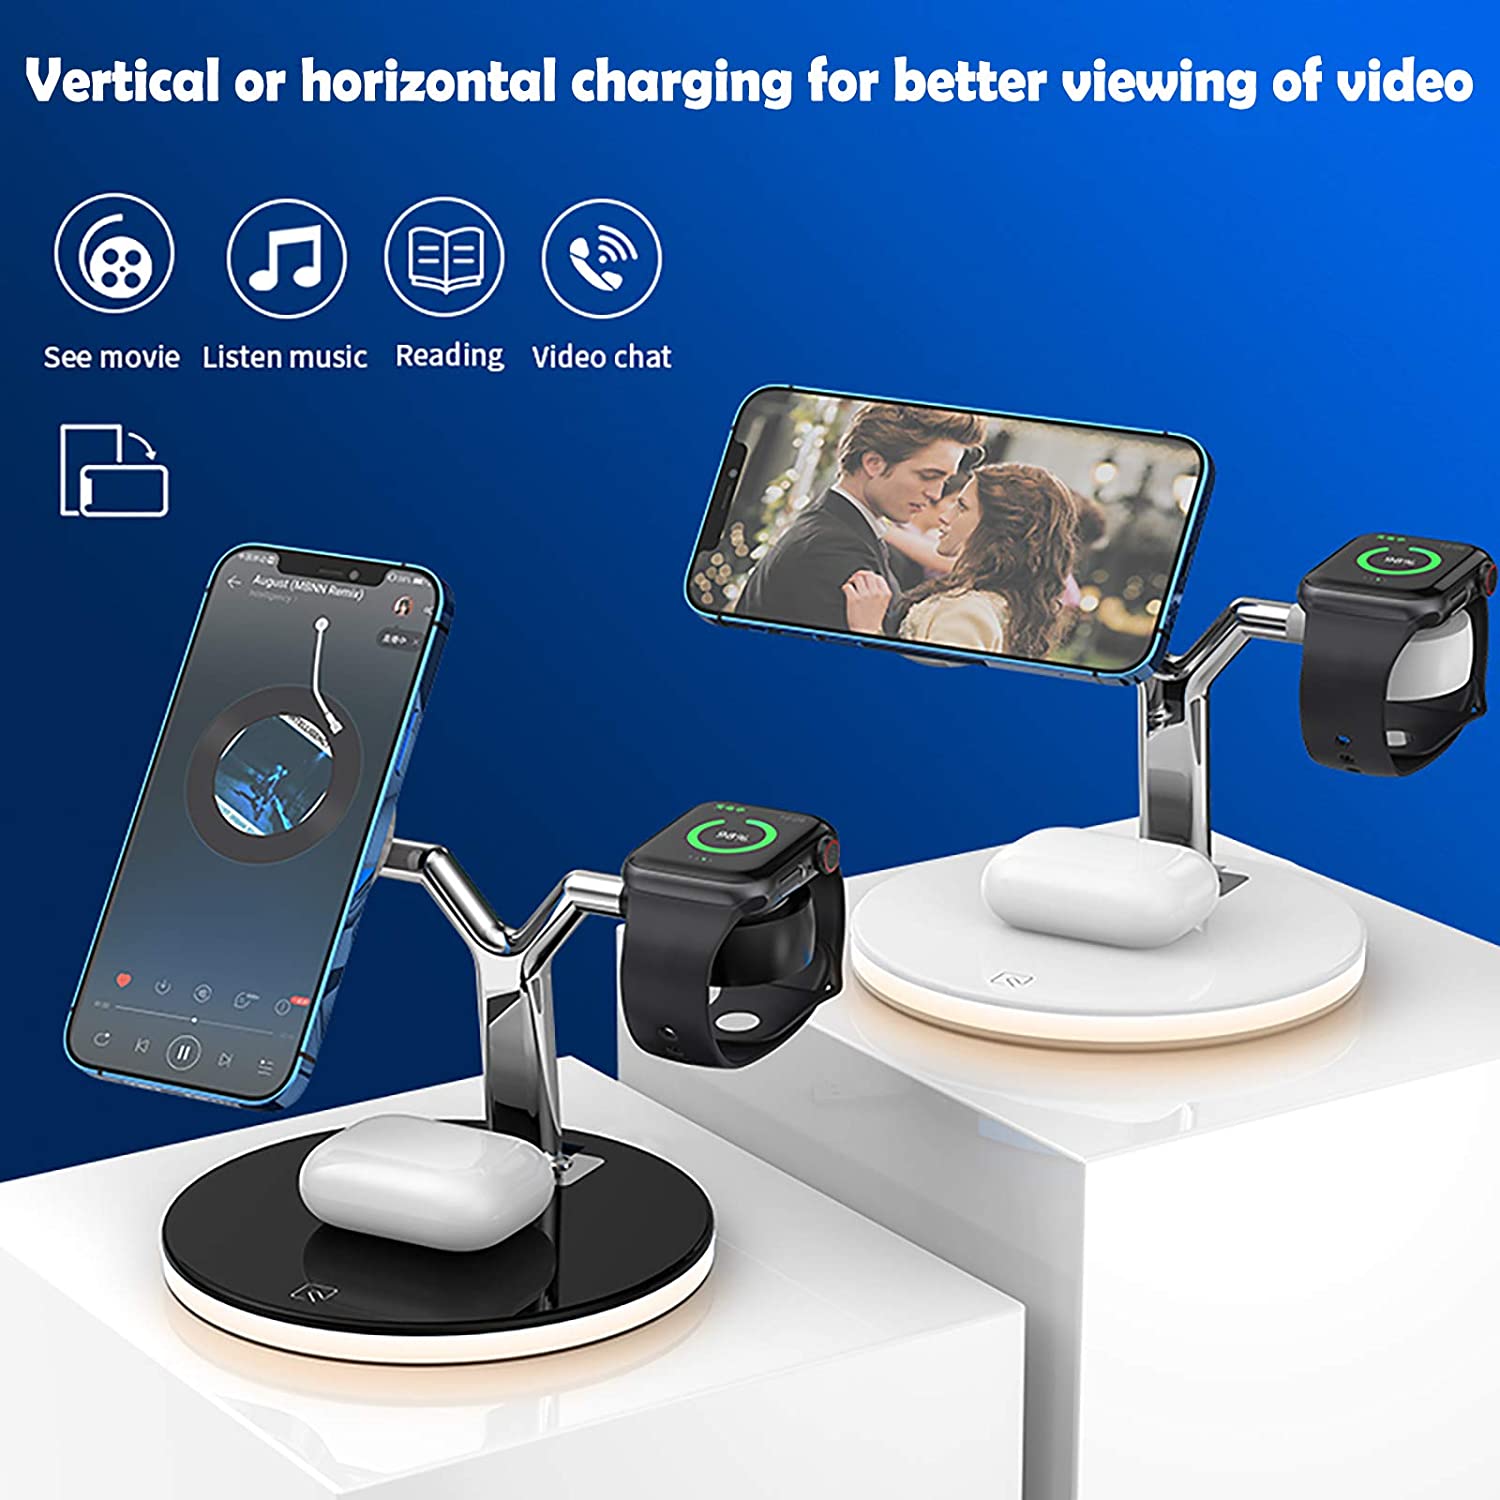 25W Fast Wireless Charging Station For iPhone & (apple) Watch